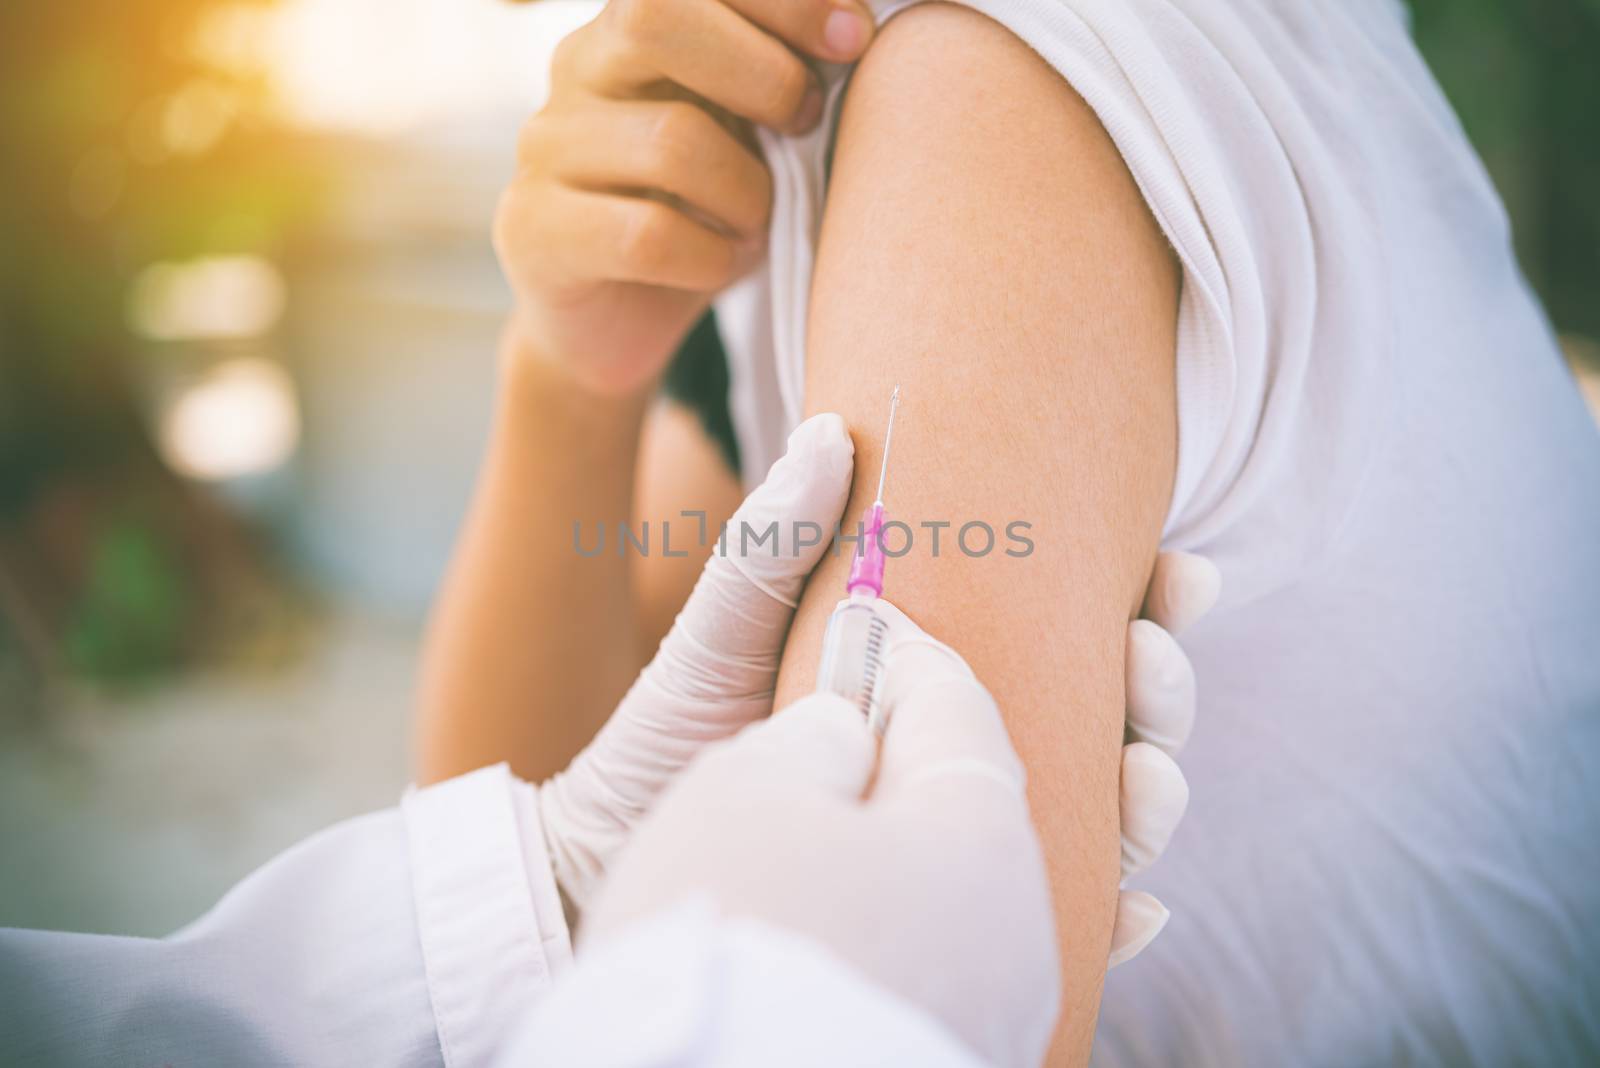 The doctor is currently treating patients by injecting arms. Vaccination or medication to prevent and treat viruses.